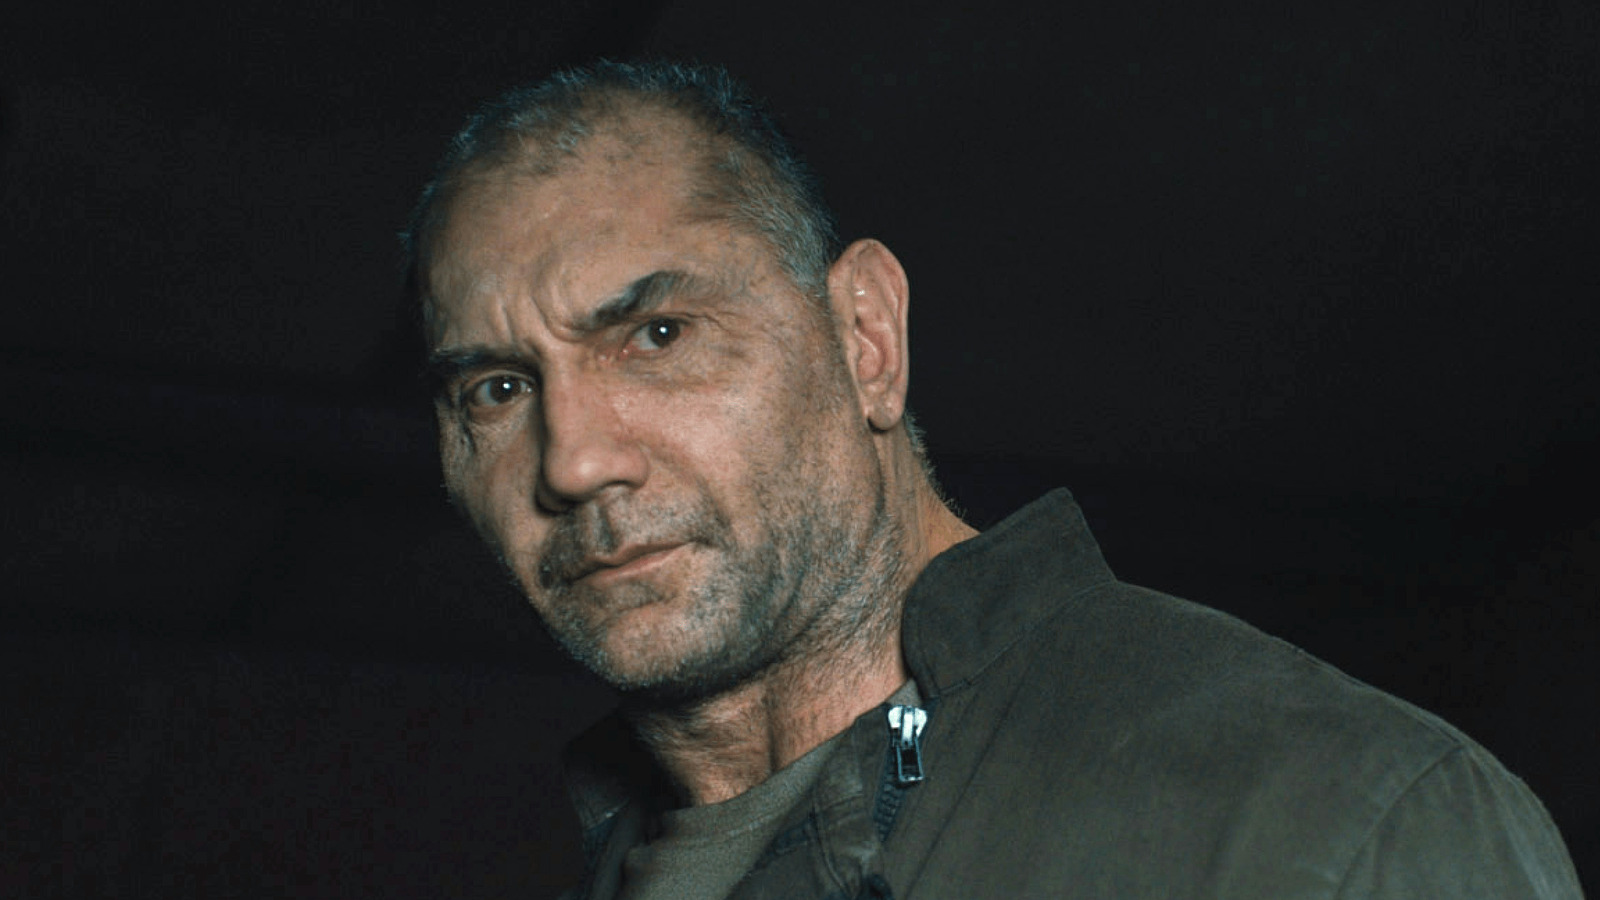 M. Night Shyamalan Cast Dave Bautista In Knock At The Cabin Thanks To Blade Runner 2049